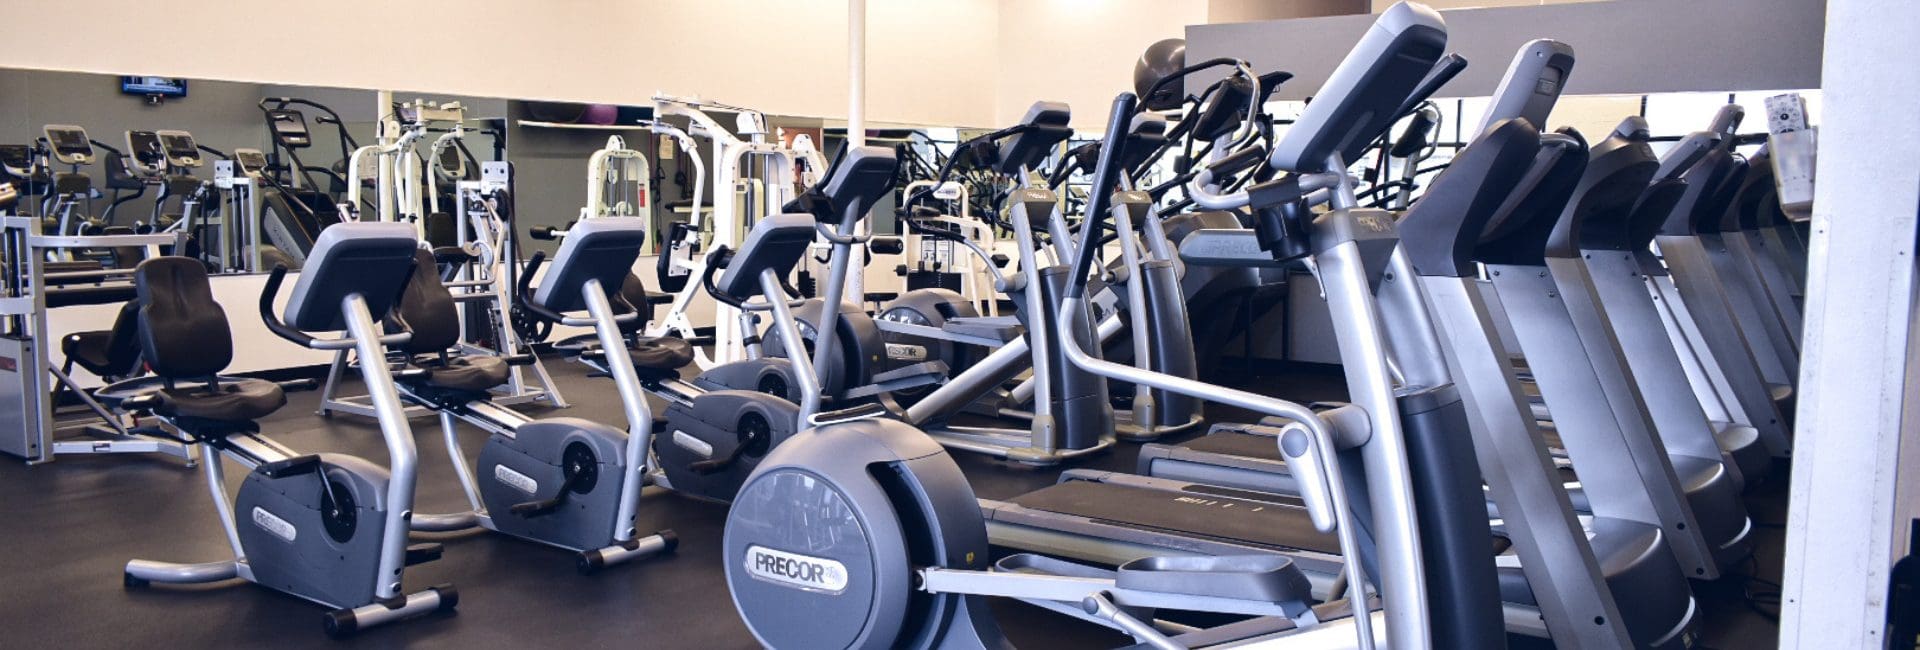 rows of cardio machines in a gym near me in Albuquerque ne heights